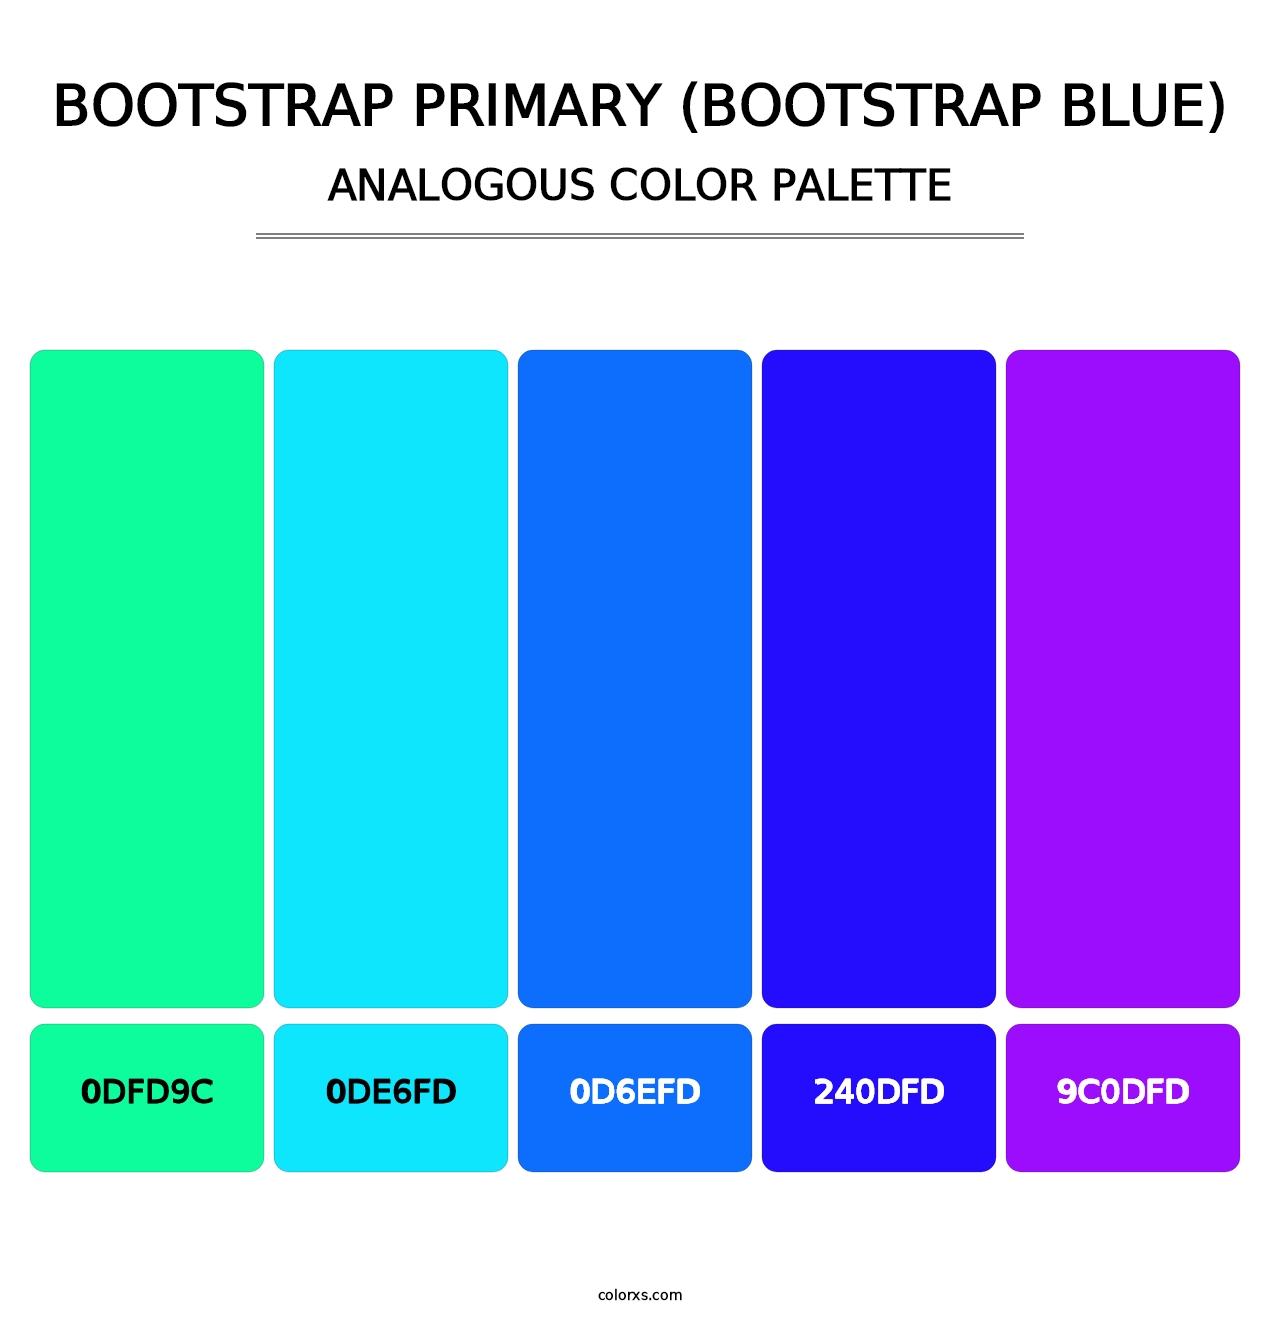 Bootstrap Primary (Bootstrap Blue) - Analogous Color Palette